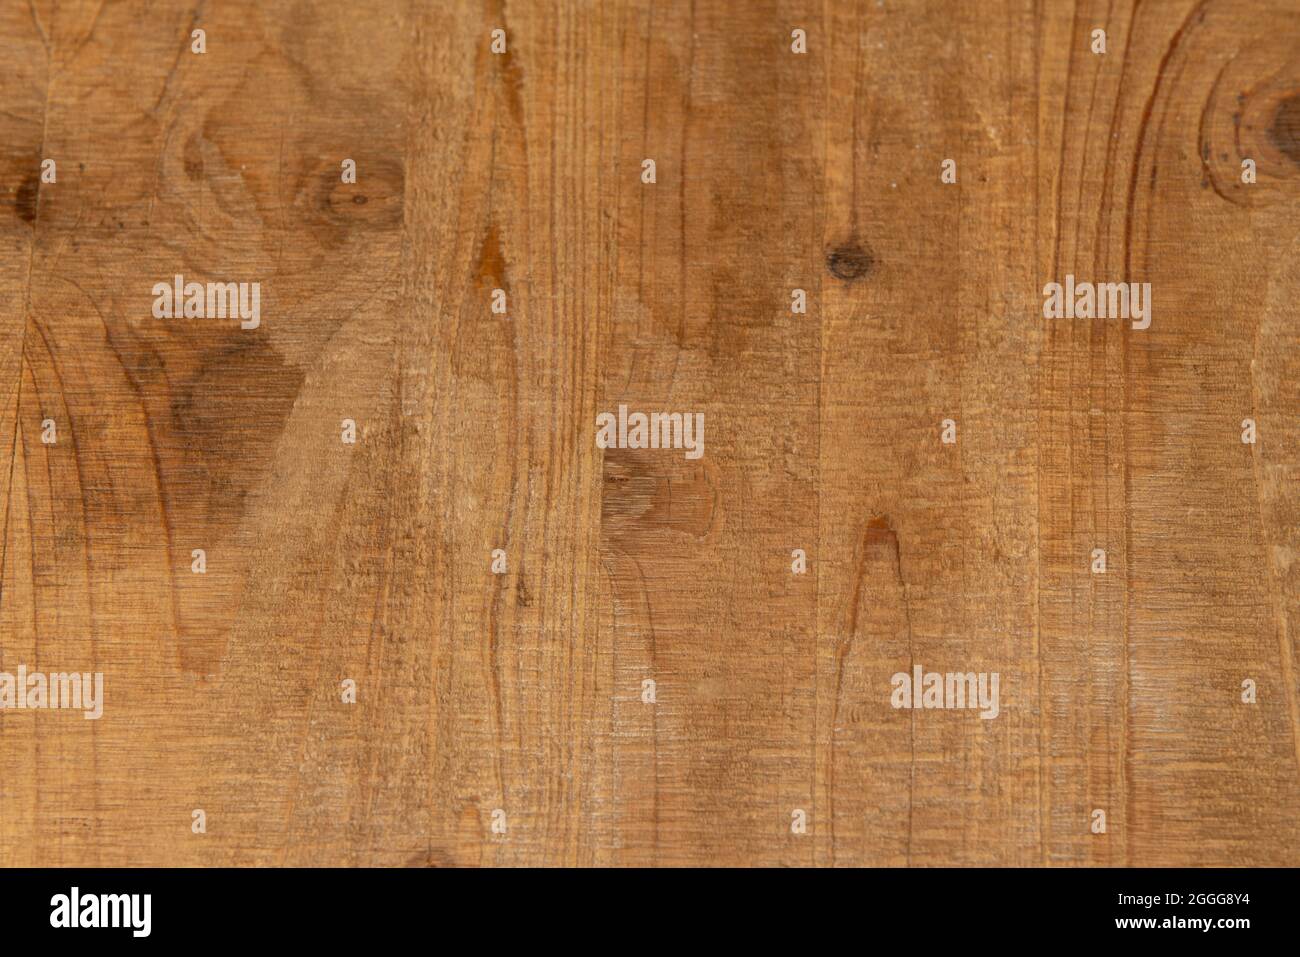 Oak wood texture background. Unvarnished wooden planks for tabletop Stock Photo